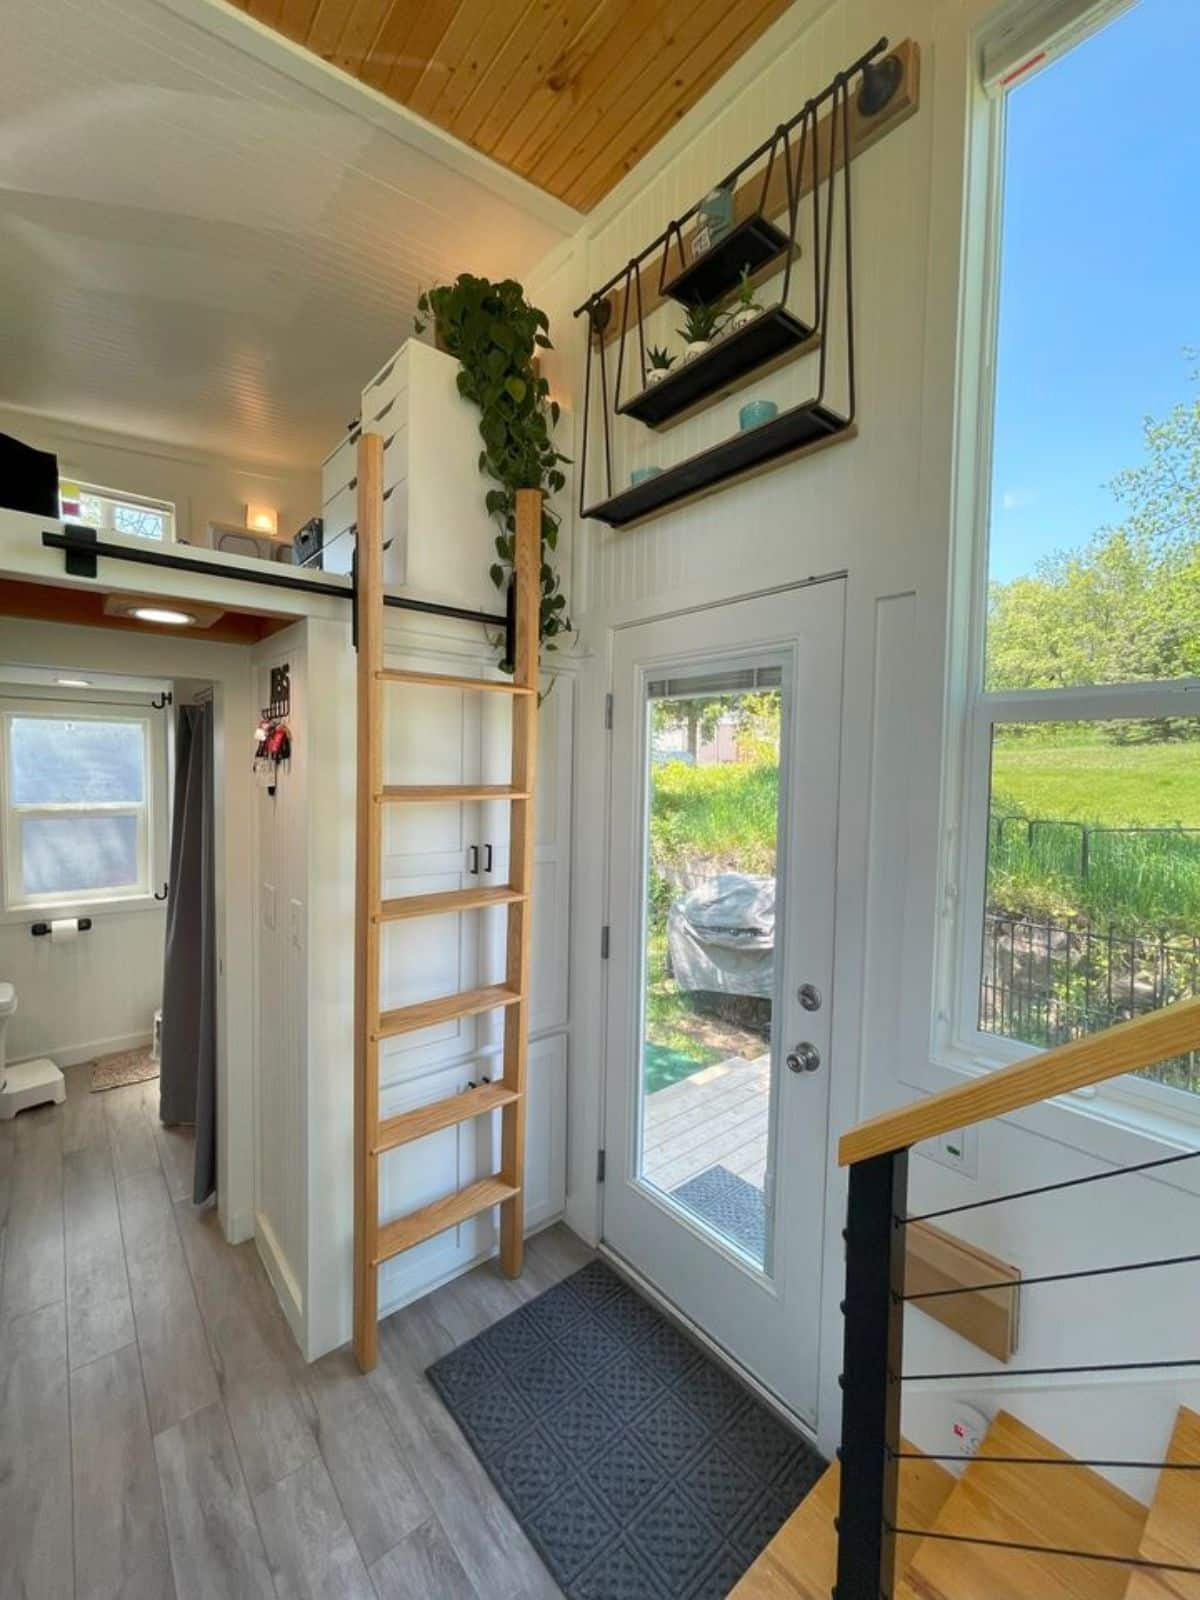 ladder leading to the another loft is besides the main entrance door